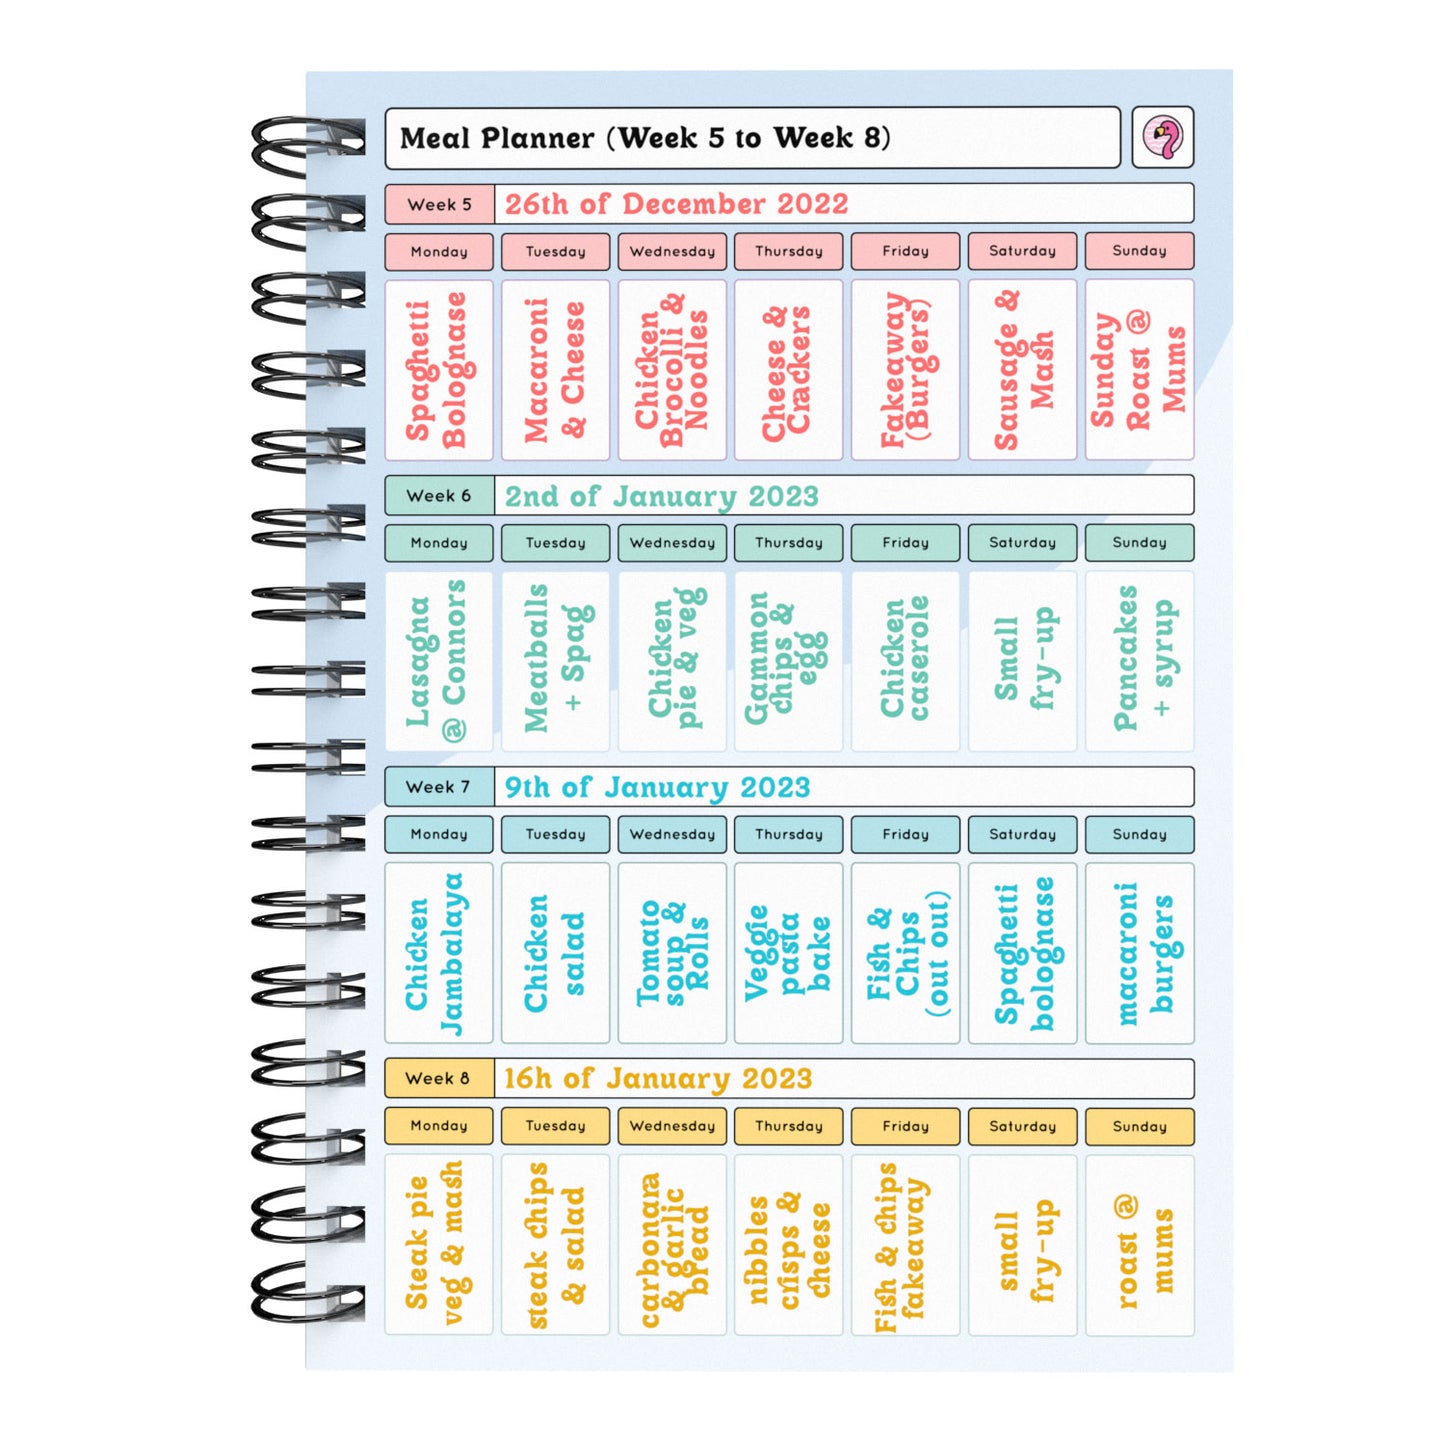 Food Diary - C62 - Calorie Counting